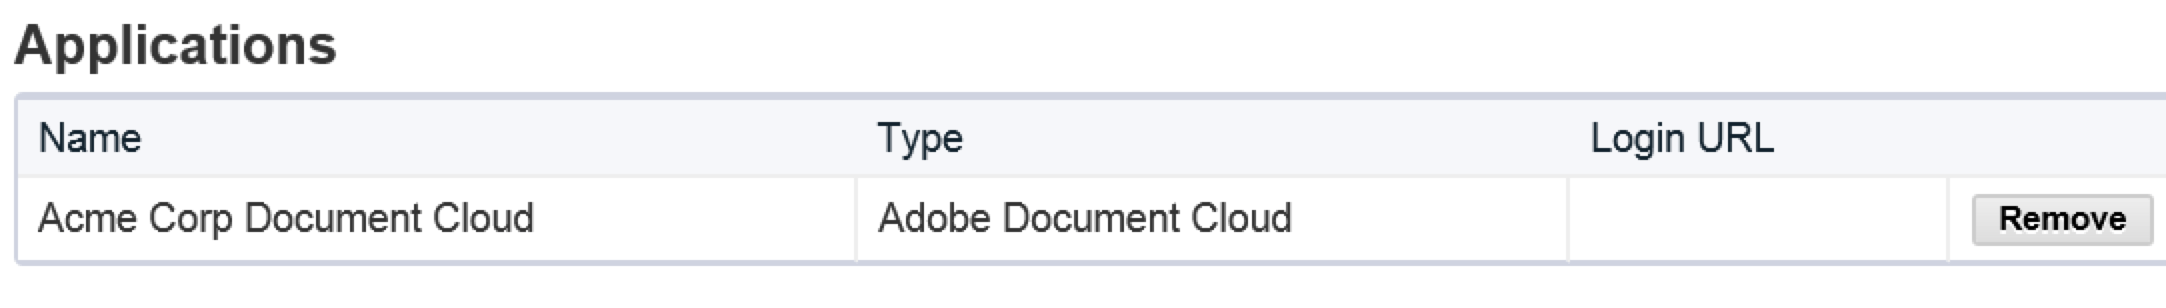 Document Cloud Application Added